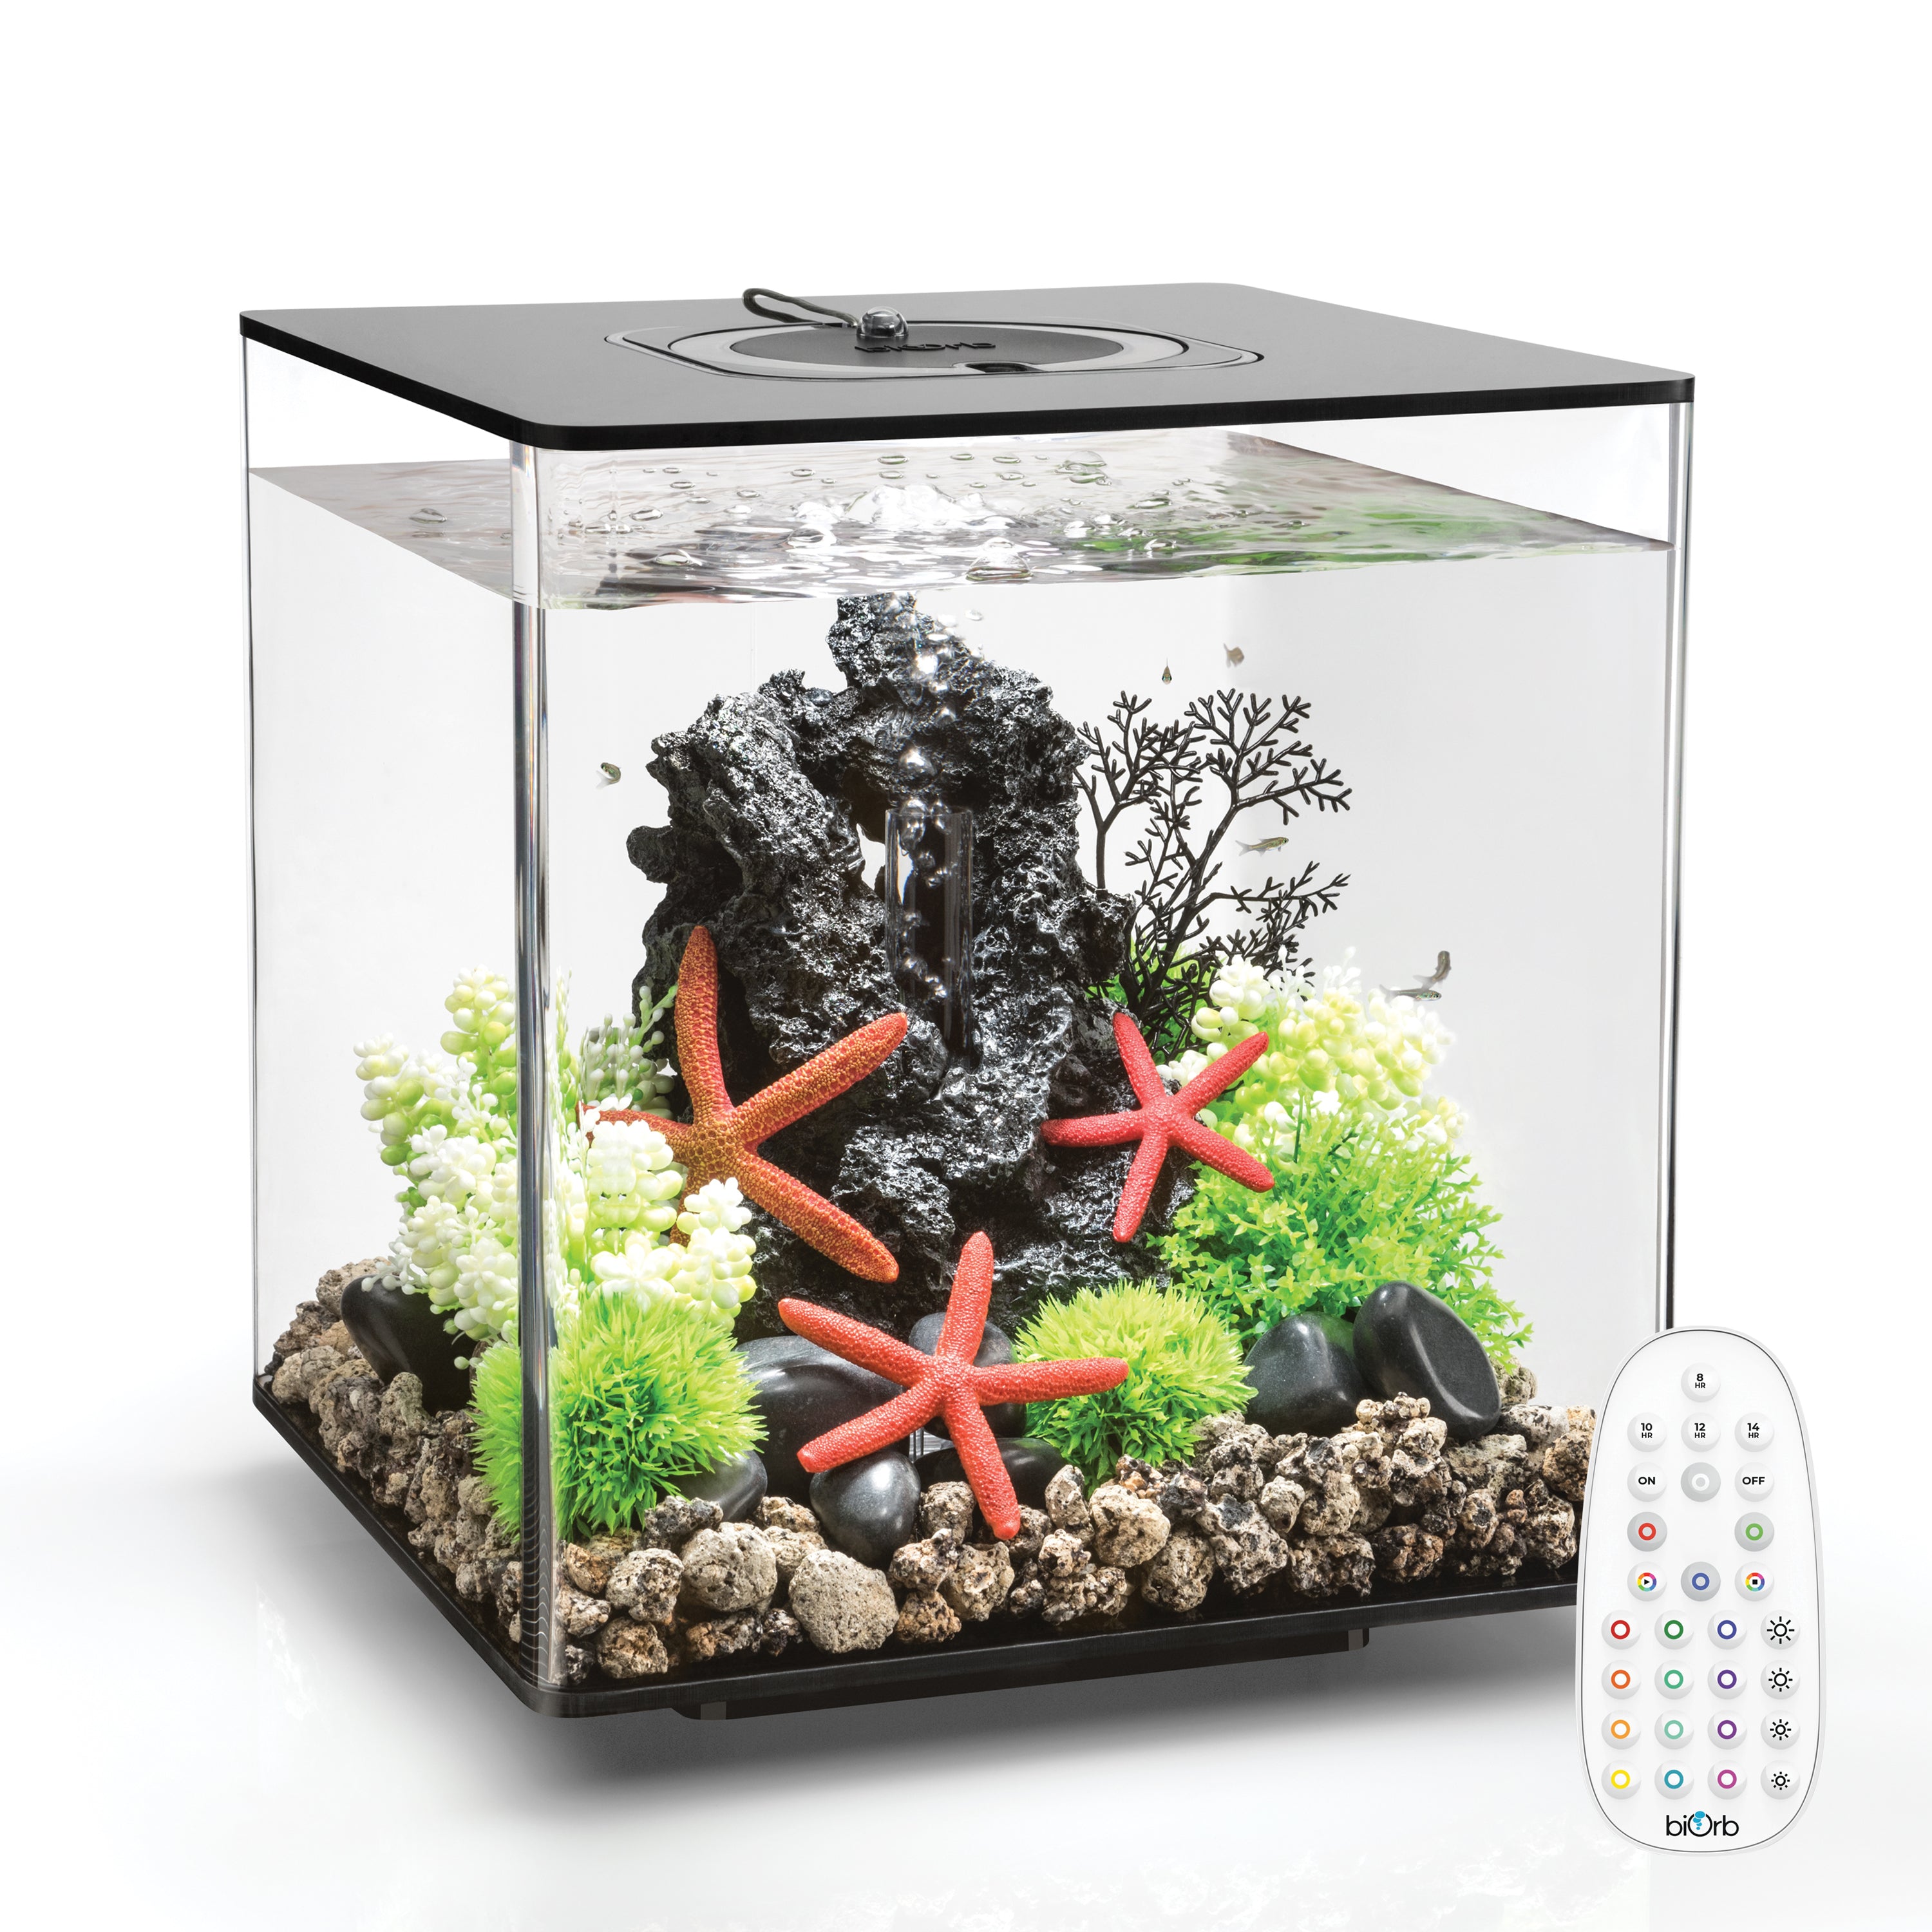 CUBE 30 Aquarium with MCR Light - 8 gallon available in black with remote